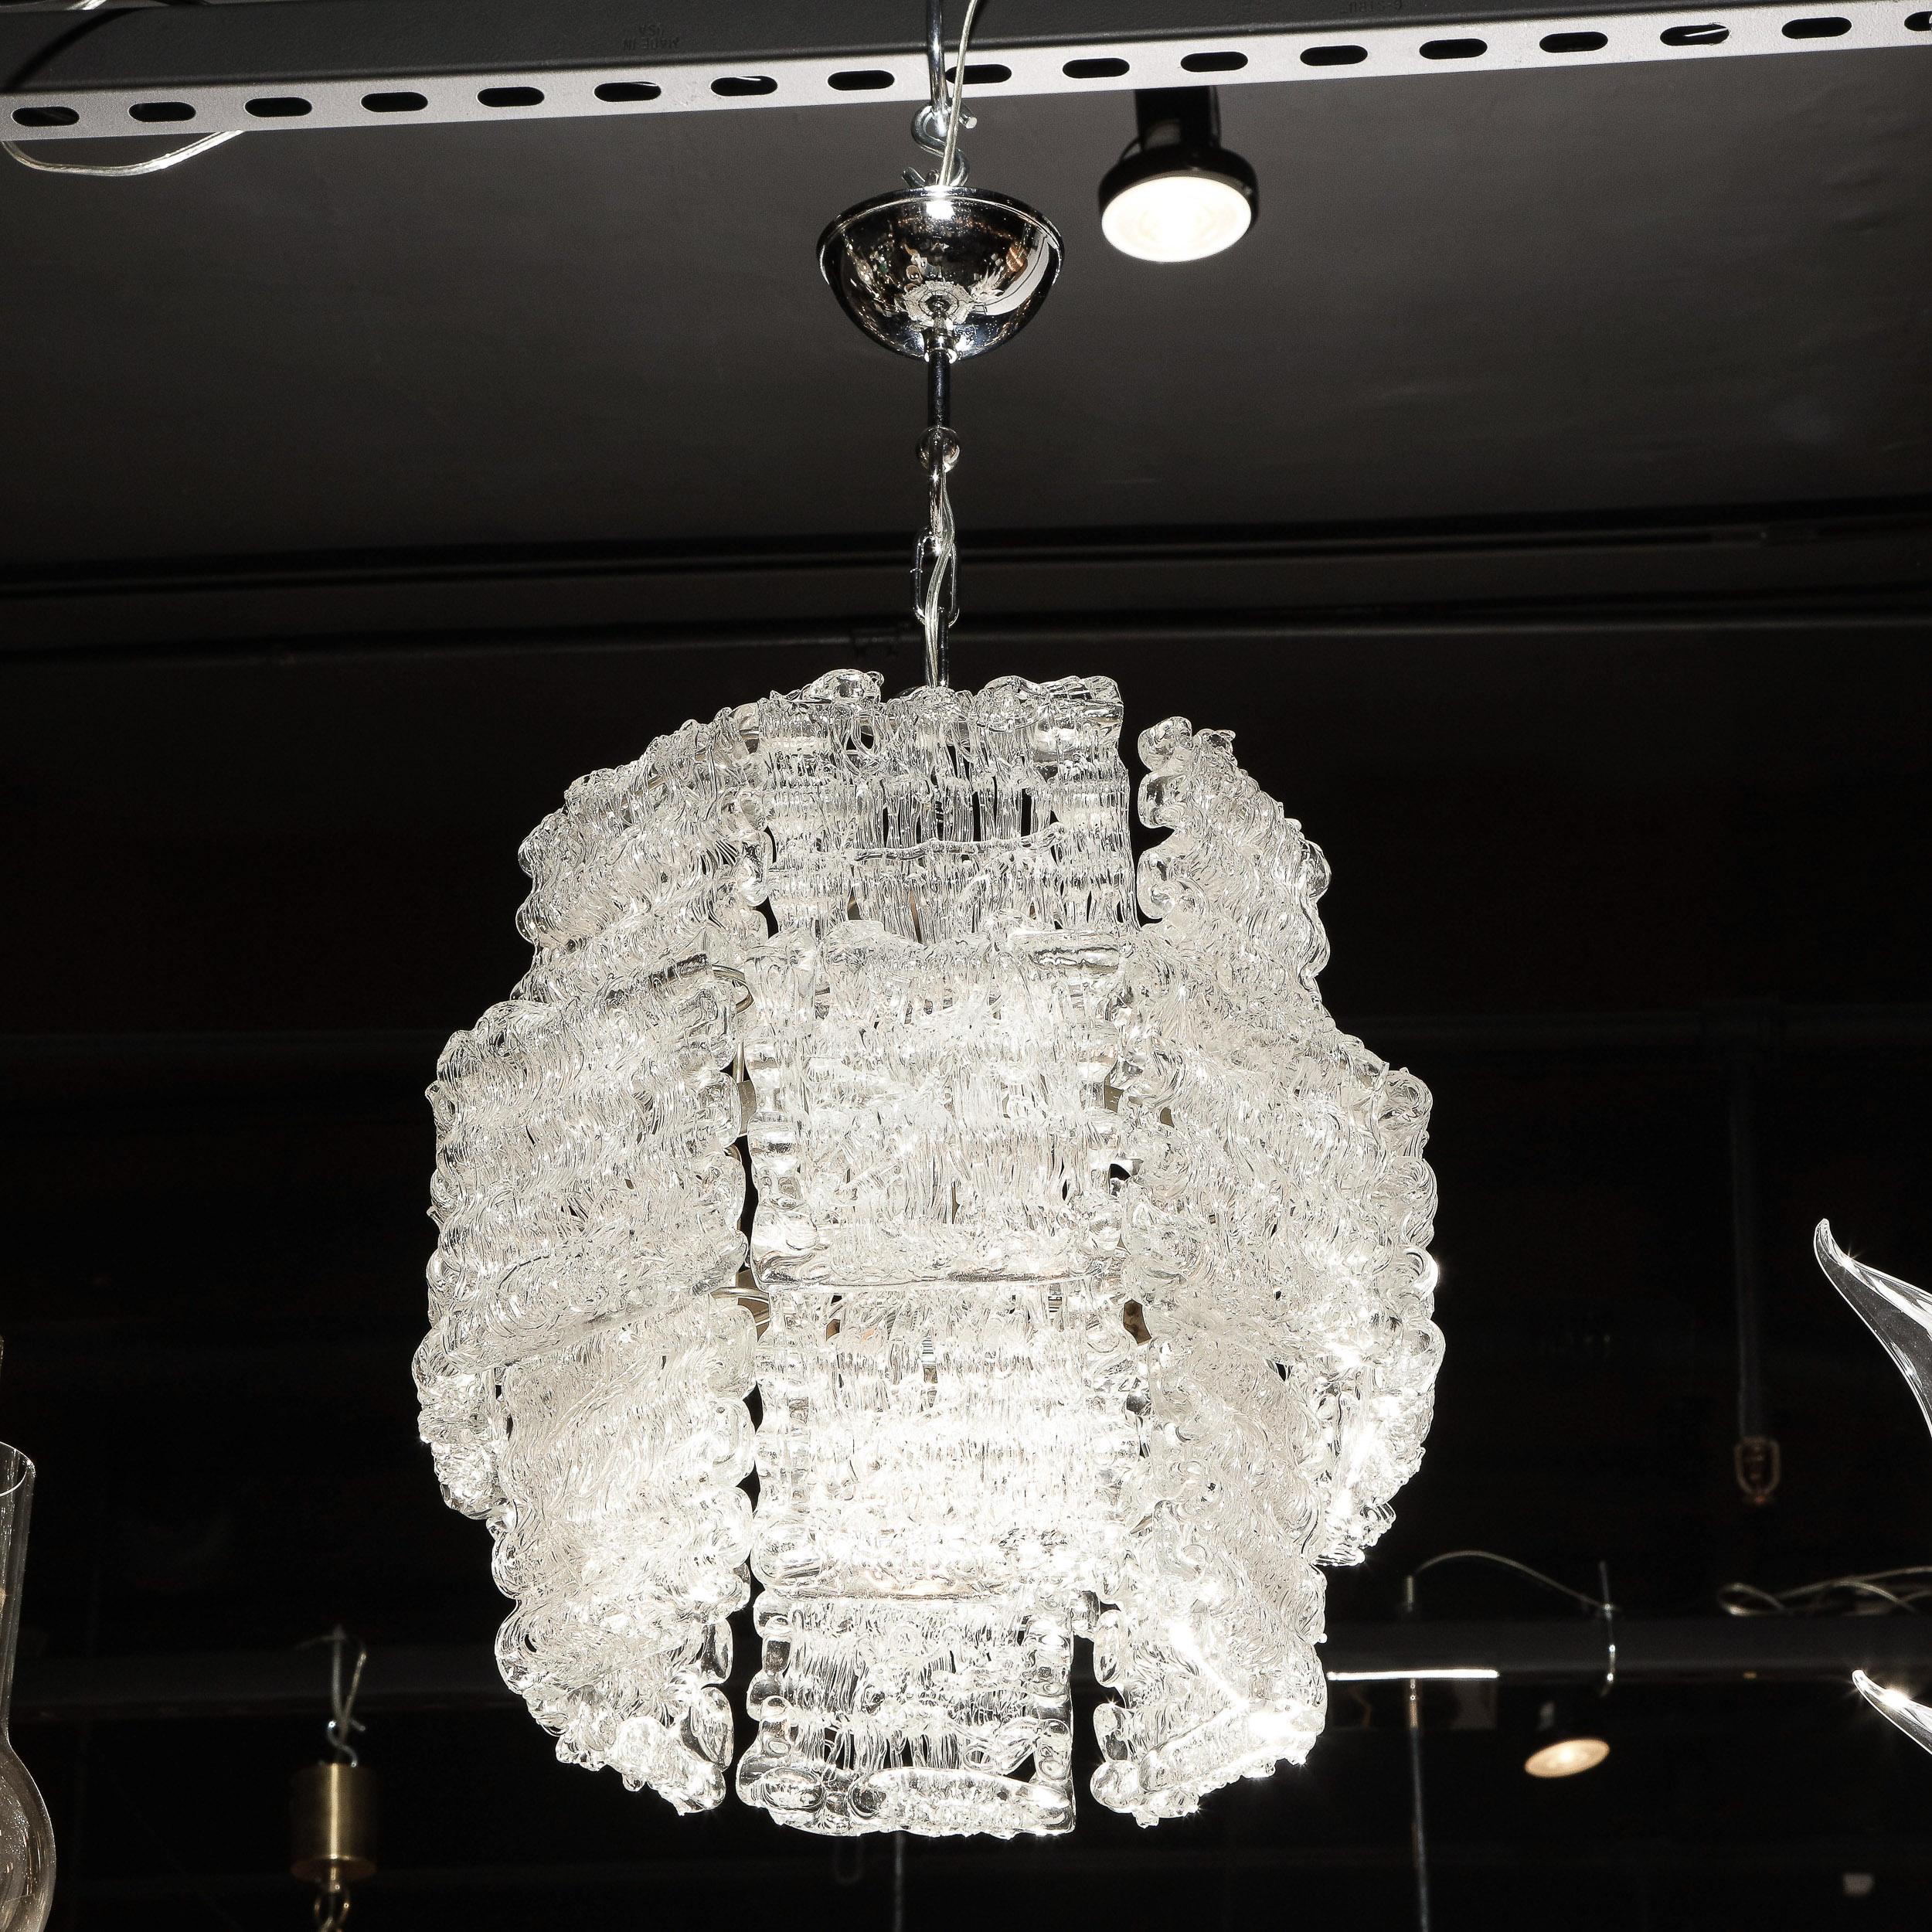 This stunning Mid-Century Modern chandelier was realized in Italy, circa 1970. It features a cylindrical body with a subtly flared center composed of panels of highly textural translucent glass- resembling ice- attached to a chrome frame. With its